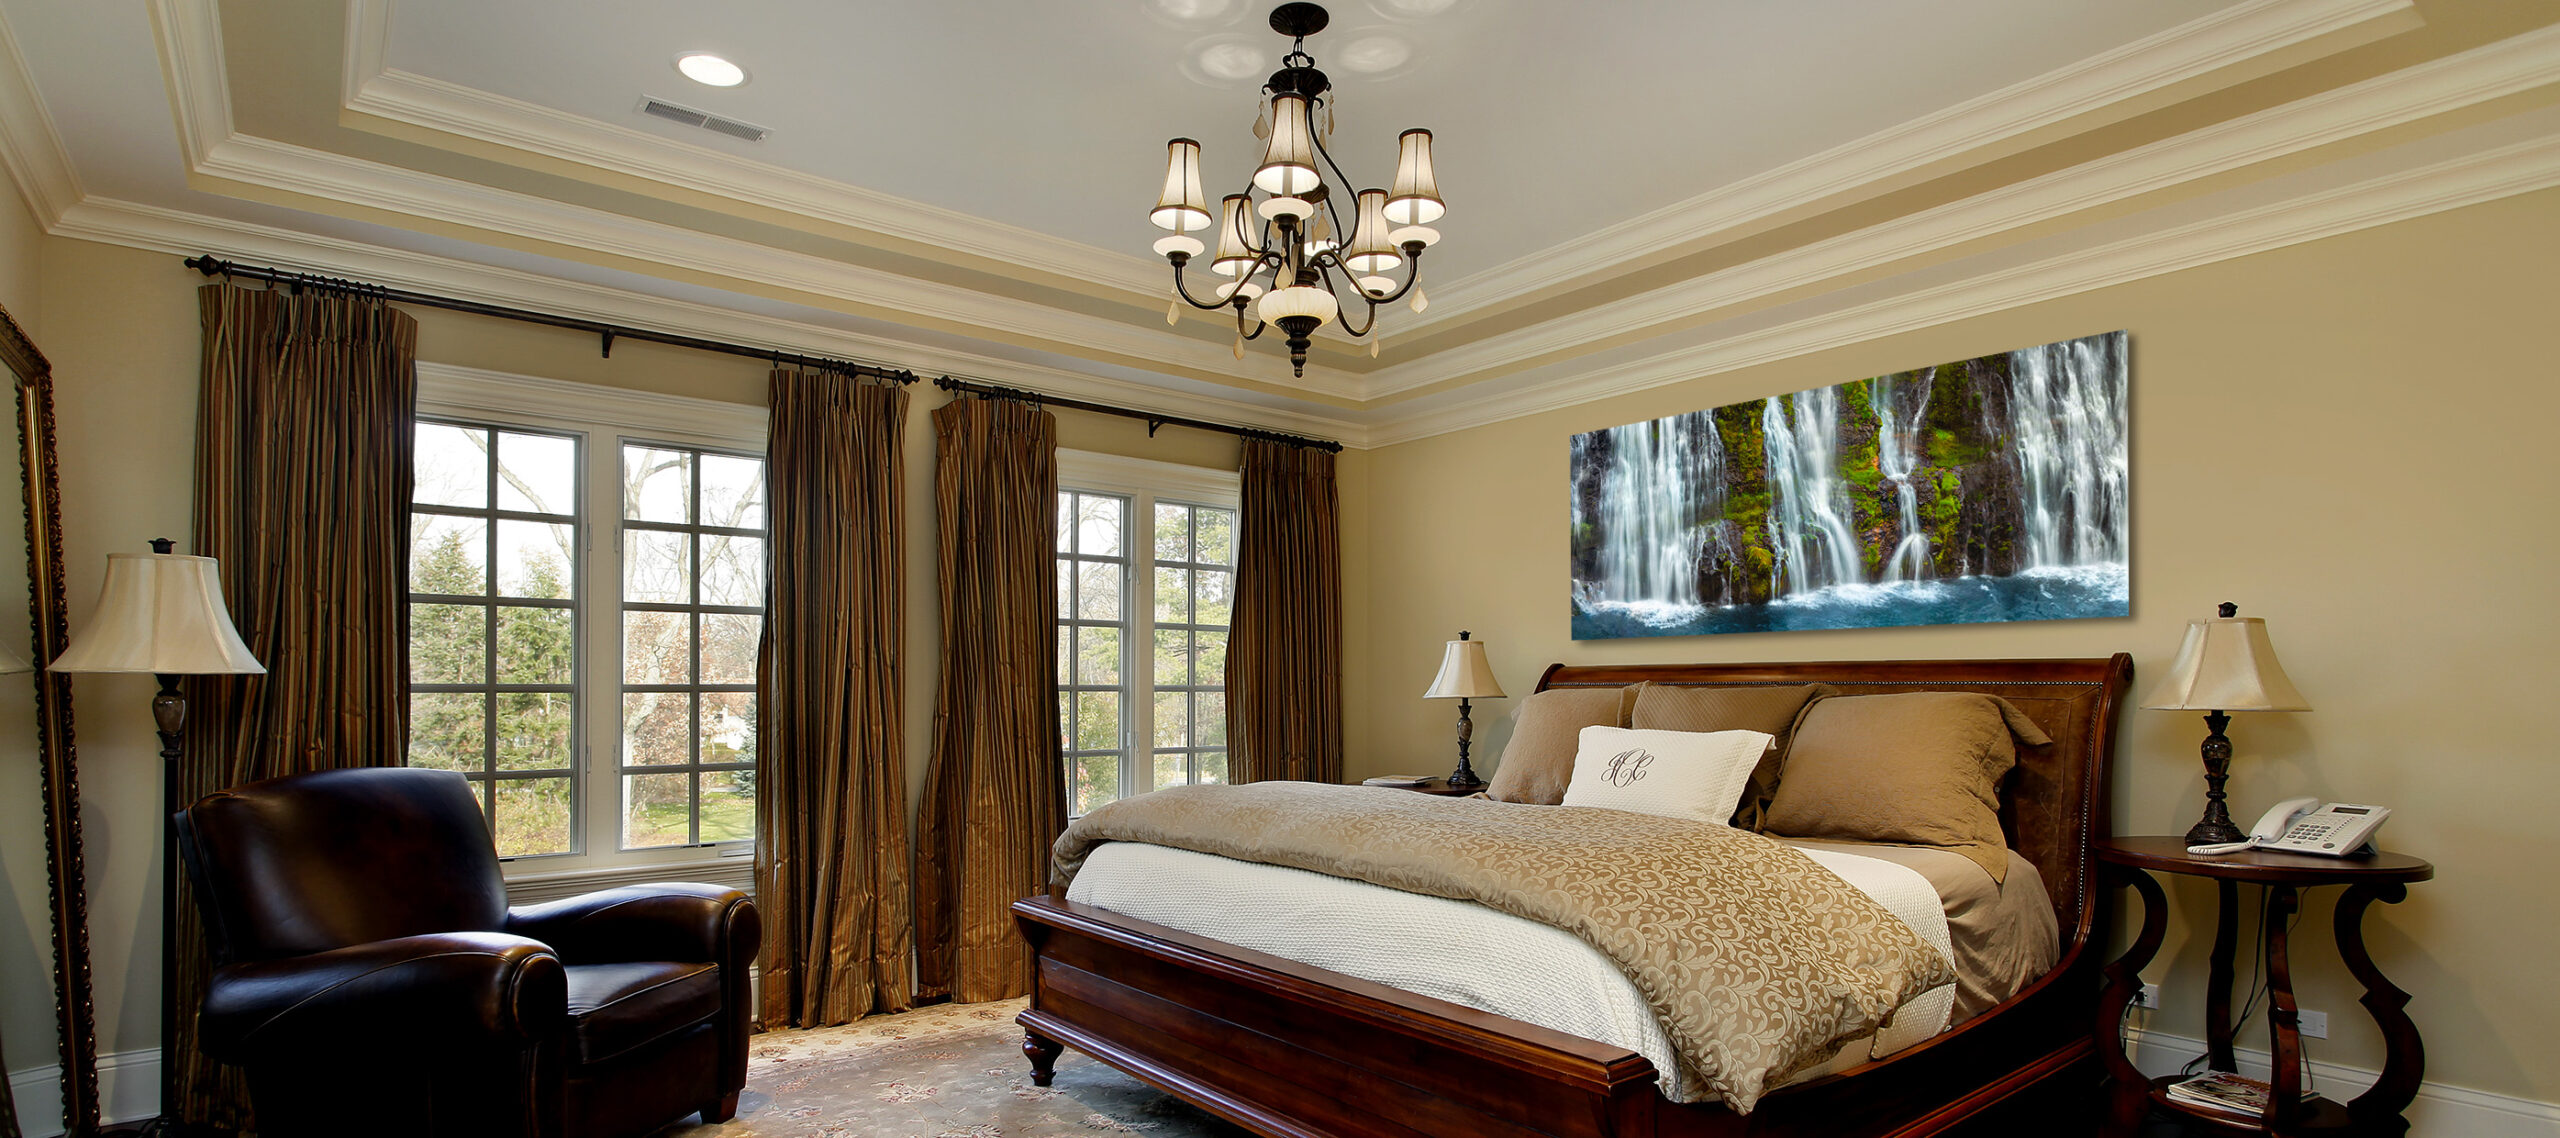 Master,Bedroom,In,Luxury,Home,With,Tray,Ceiling